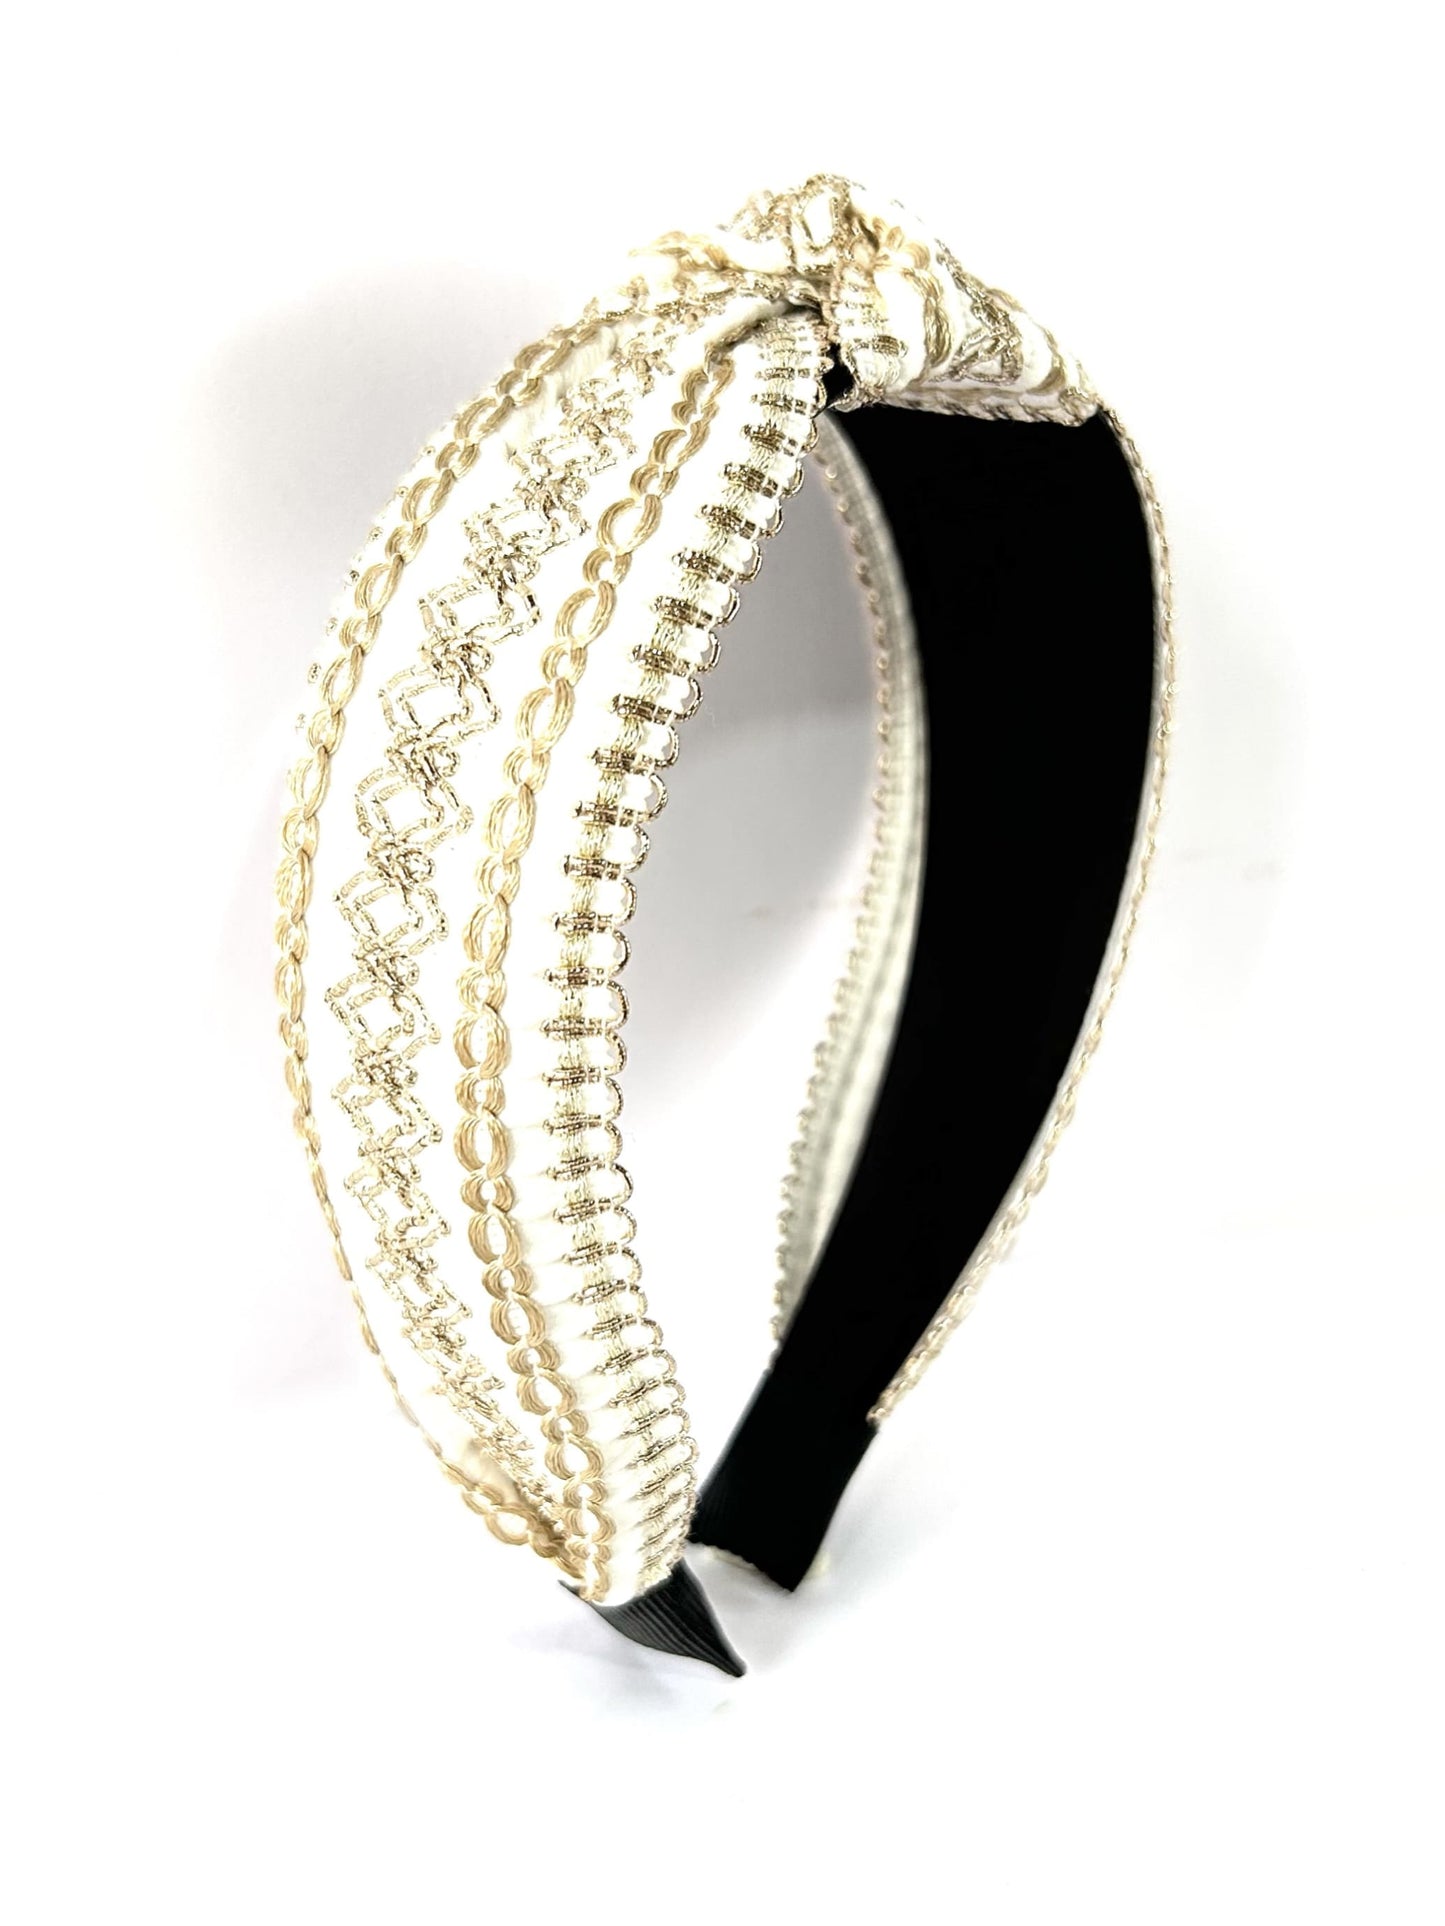 Embroidered White Hair Hoop